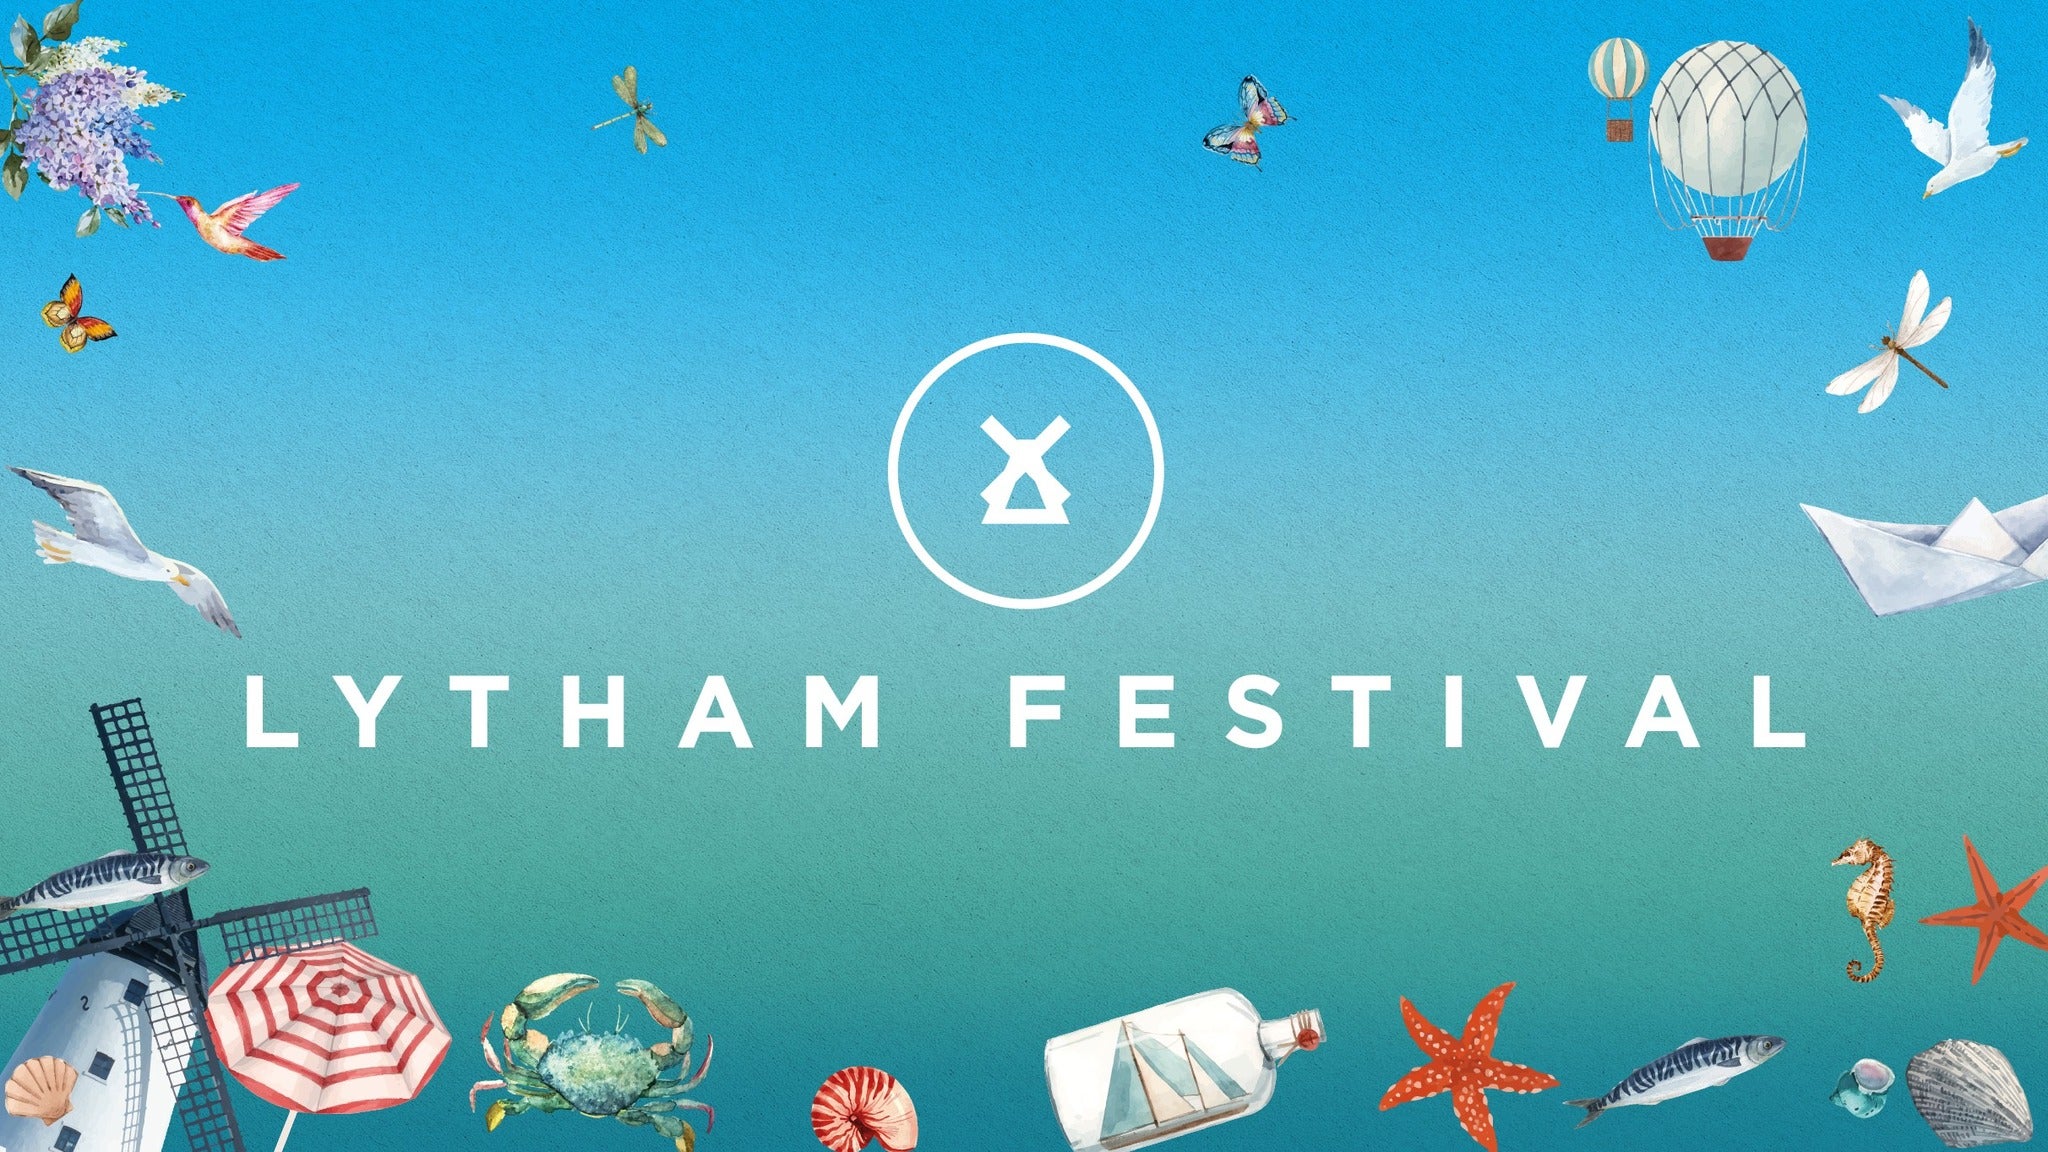 Lytham Festival - Hozier presale password for approved tickets in Lancashire